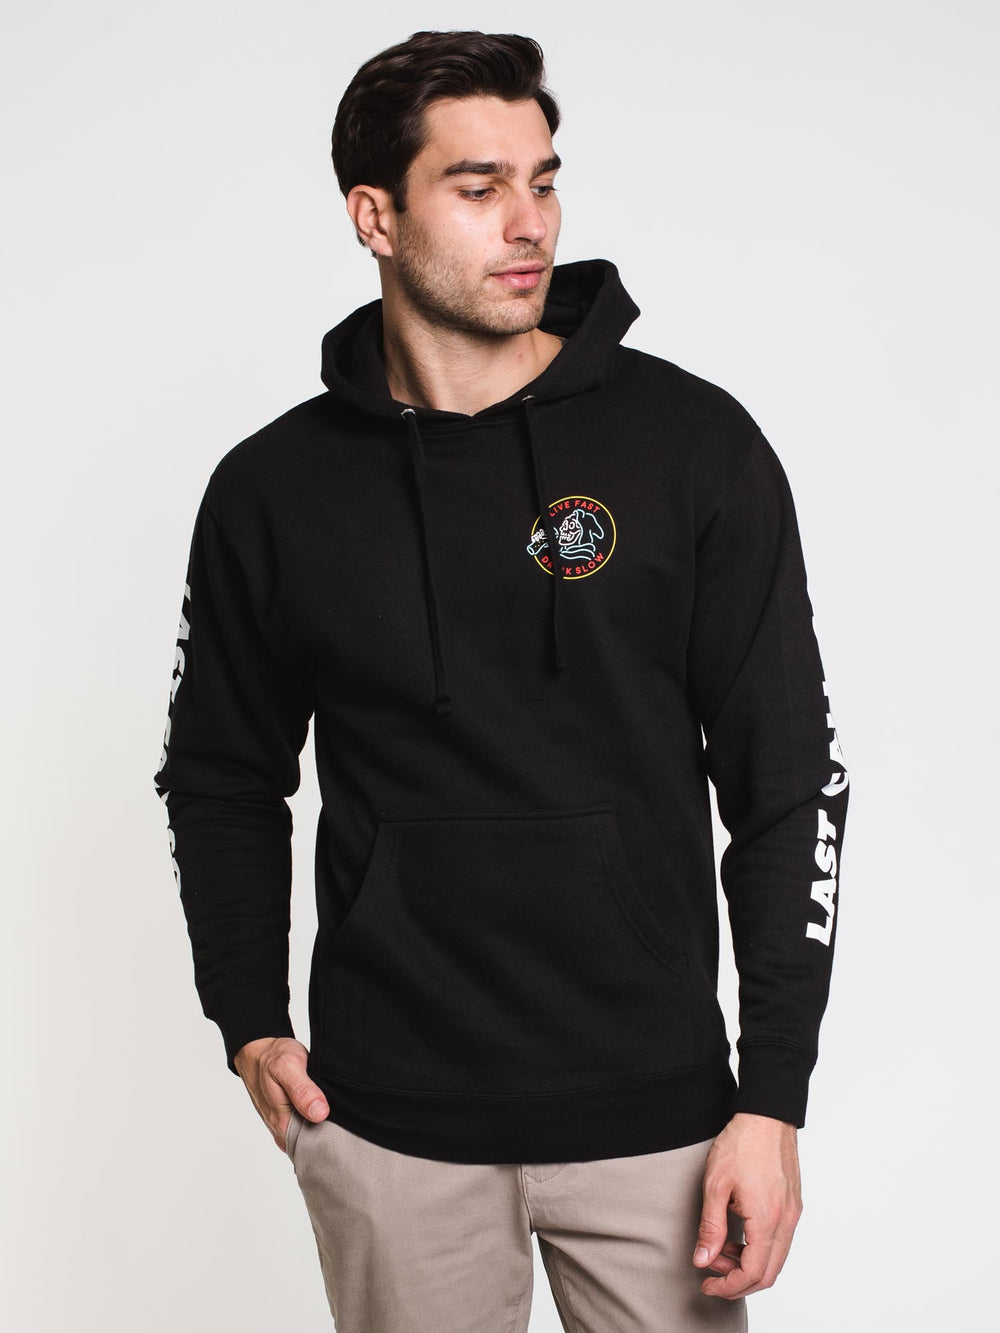 LAST CALL DRINK SLOW PULLOVER HOODIE- BLACK - CLEARANCE